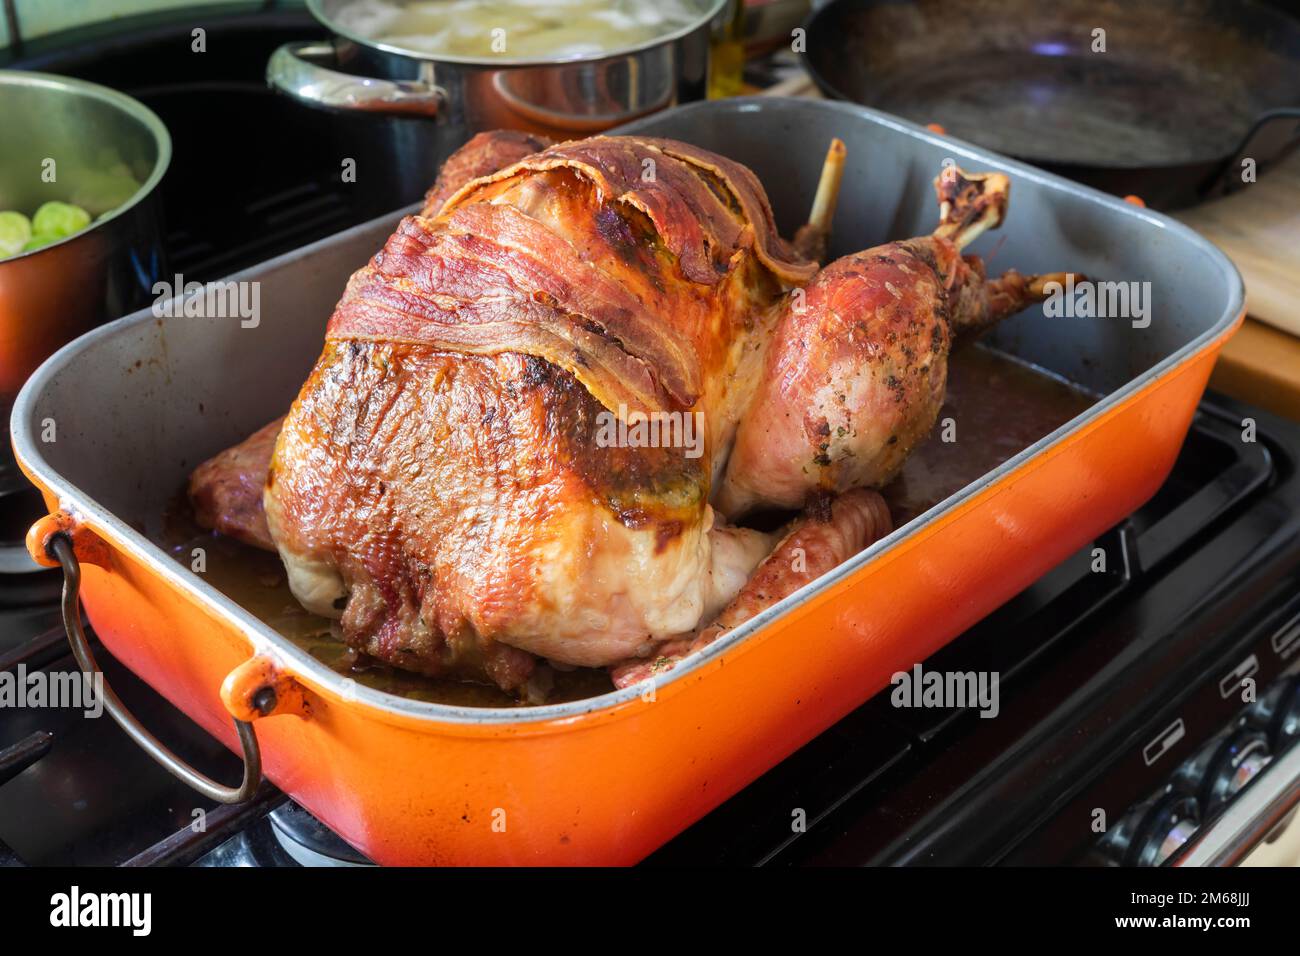 A cooked roast Bronze Turkey topped with streaky bacon rashers, resting on a cooker hob ready to be carved. Stock Photo